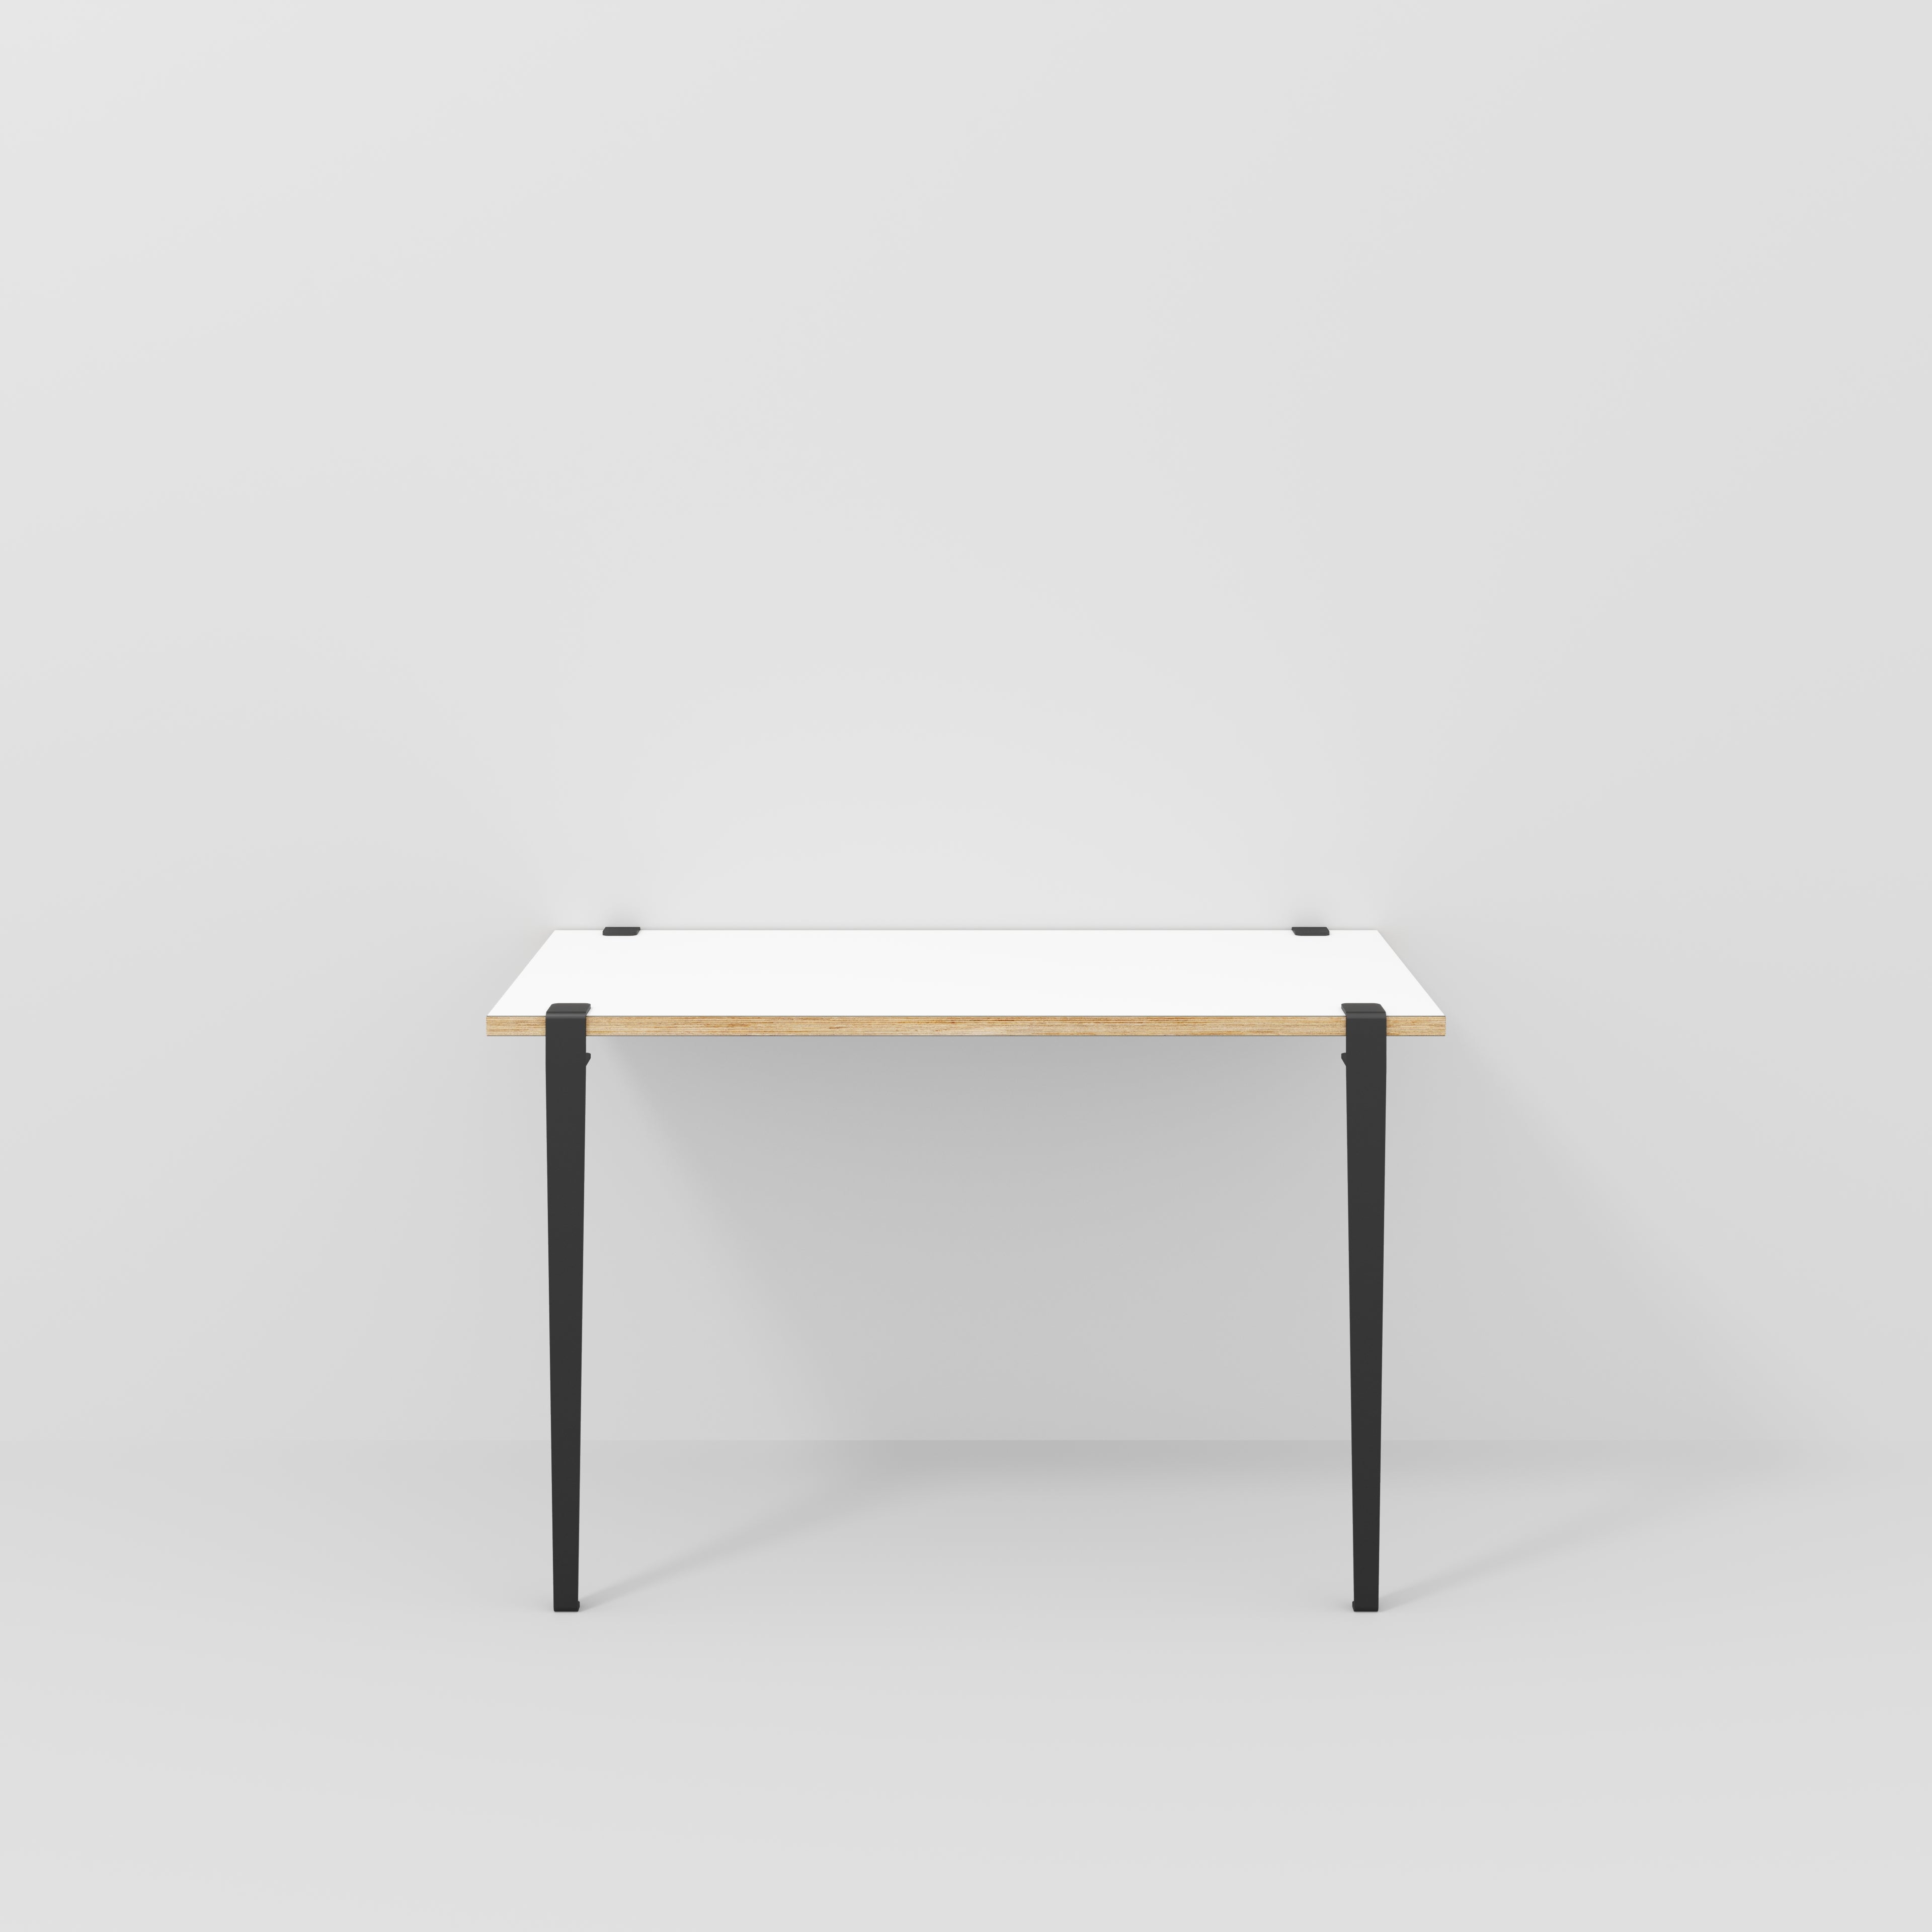 Wall Desk with Black Tiptoe Legs and Brackets - Formica White - 1200(w) x 600(d) x 750(h)